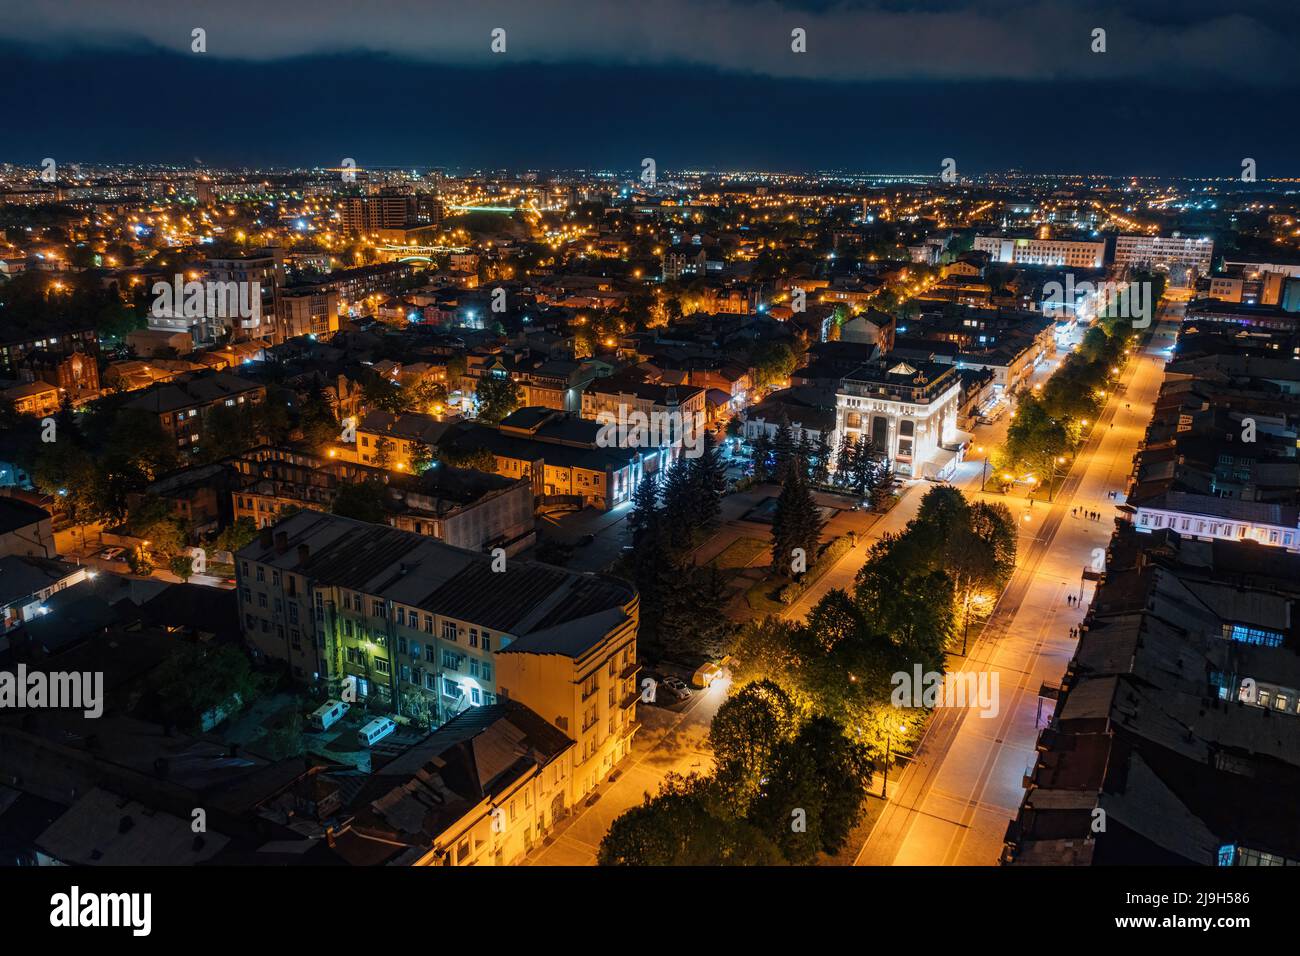 Vladikavkaz, capital of North Ossetia. Historical downtown from drone at night Stock Photo